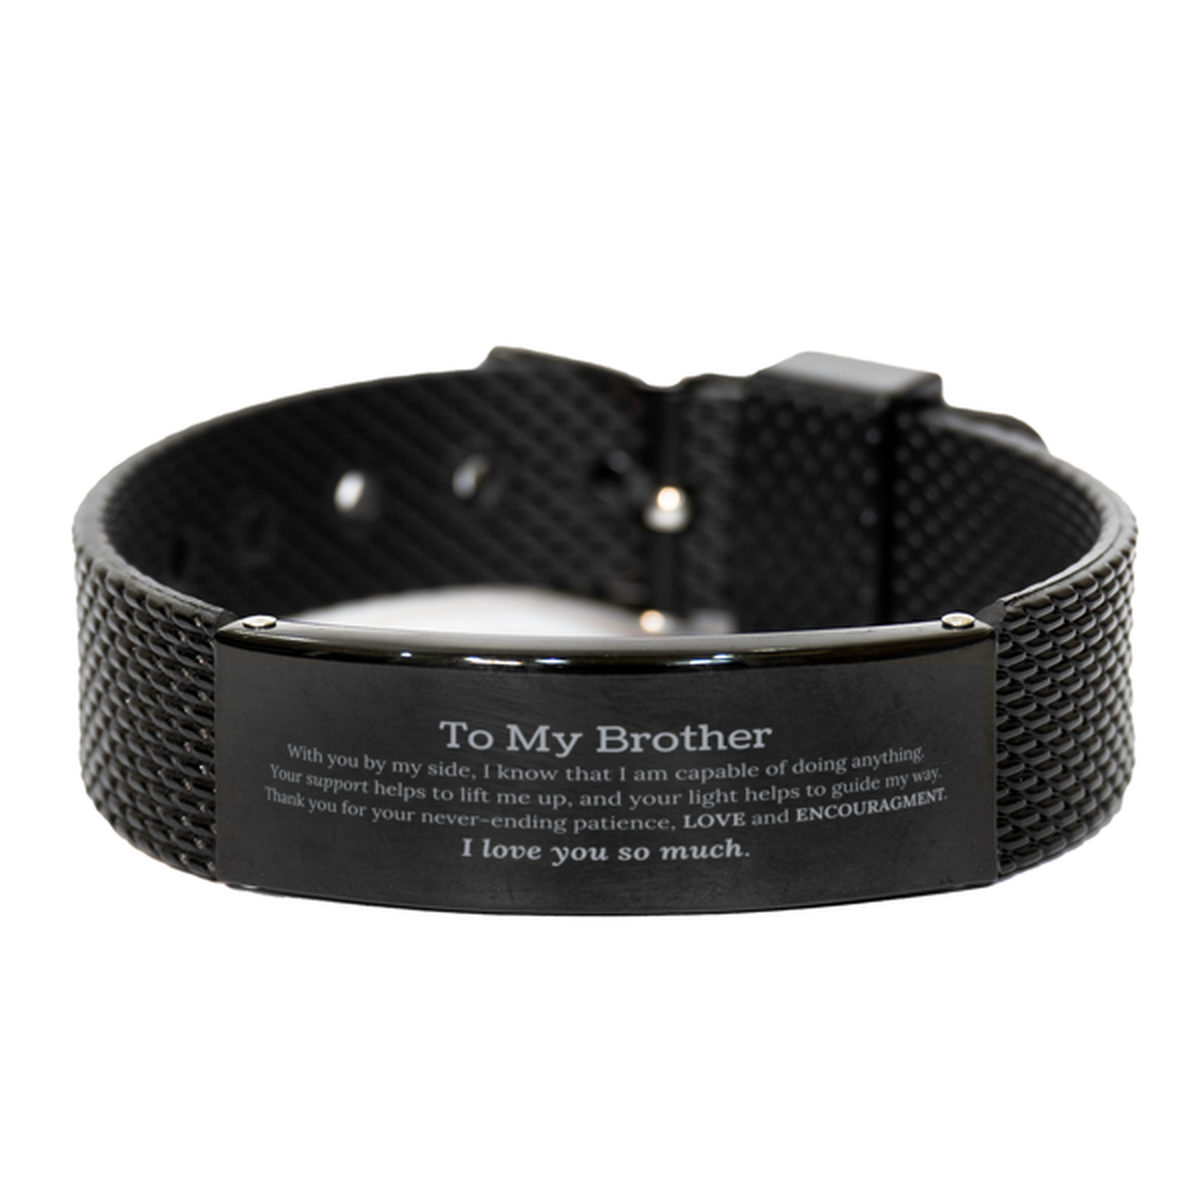 Appreciation Brother Black Shark Mesh Bracelet Gifts, To My Brother Birthday Christmas Wedding Keepsake Gifts for Brother With you by my side, I know that I am capable of doing anything. I love you so much